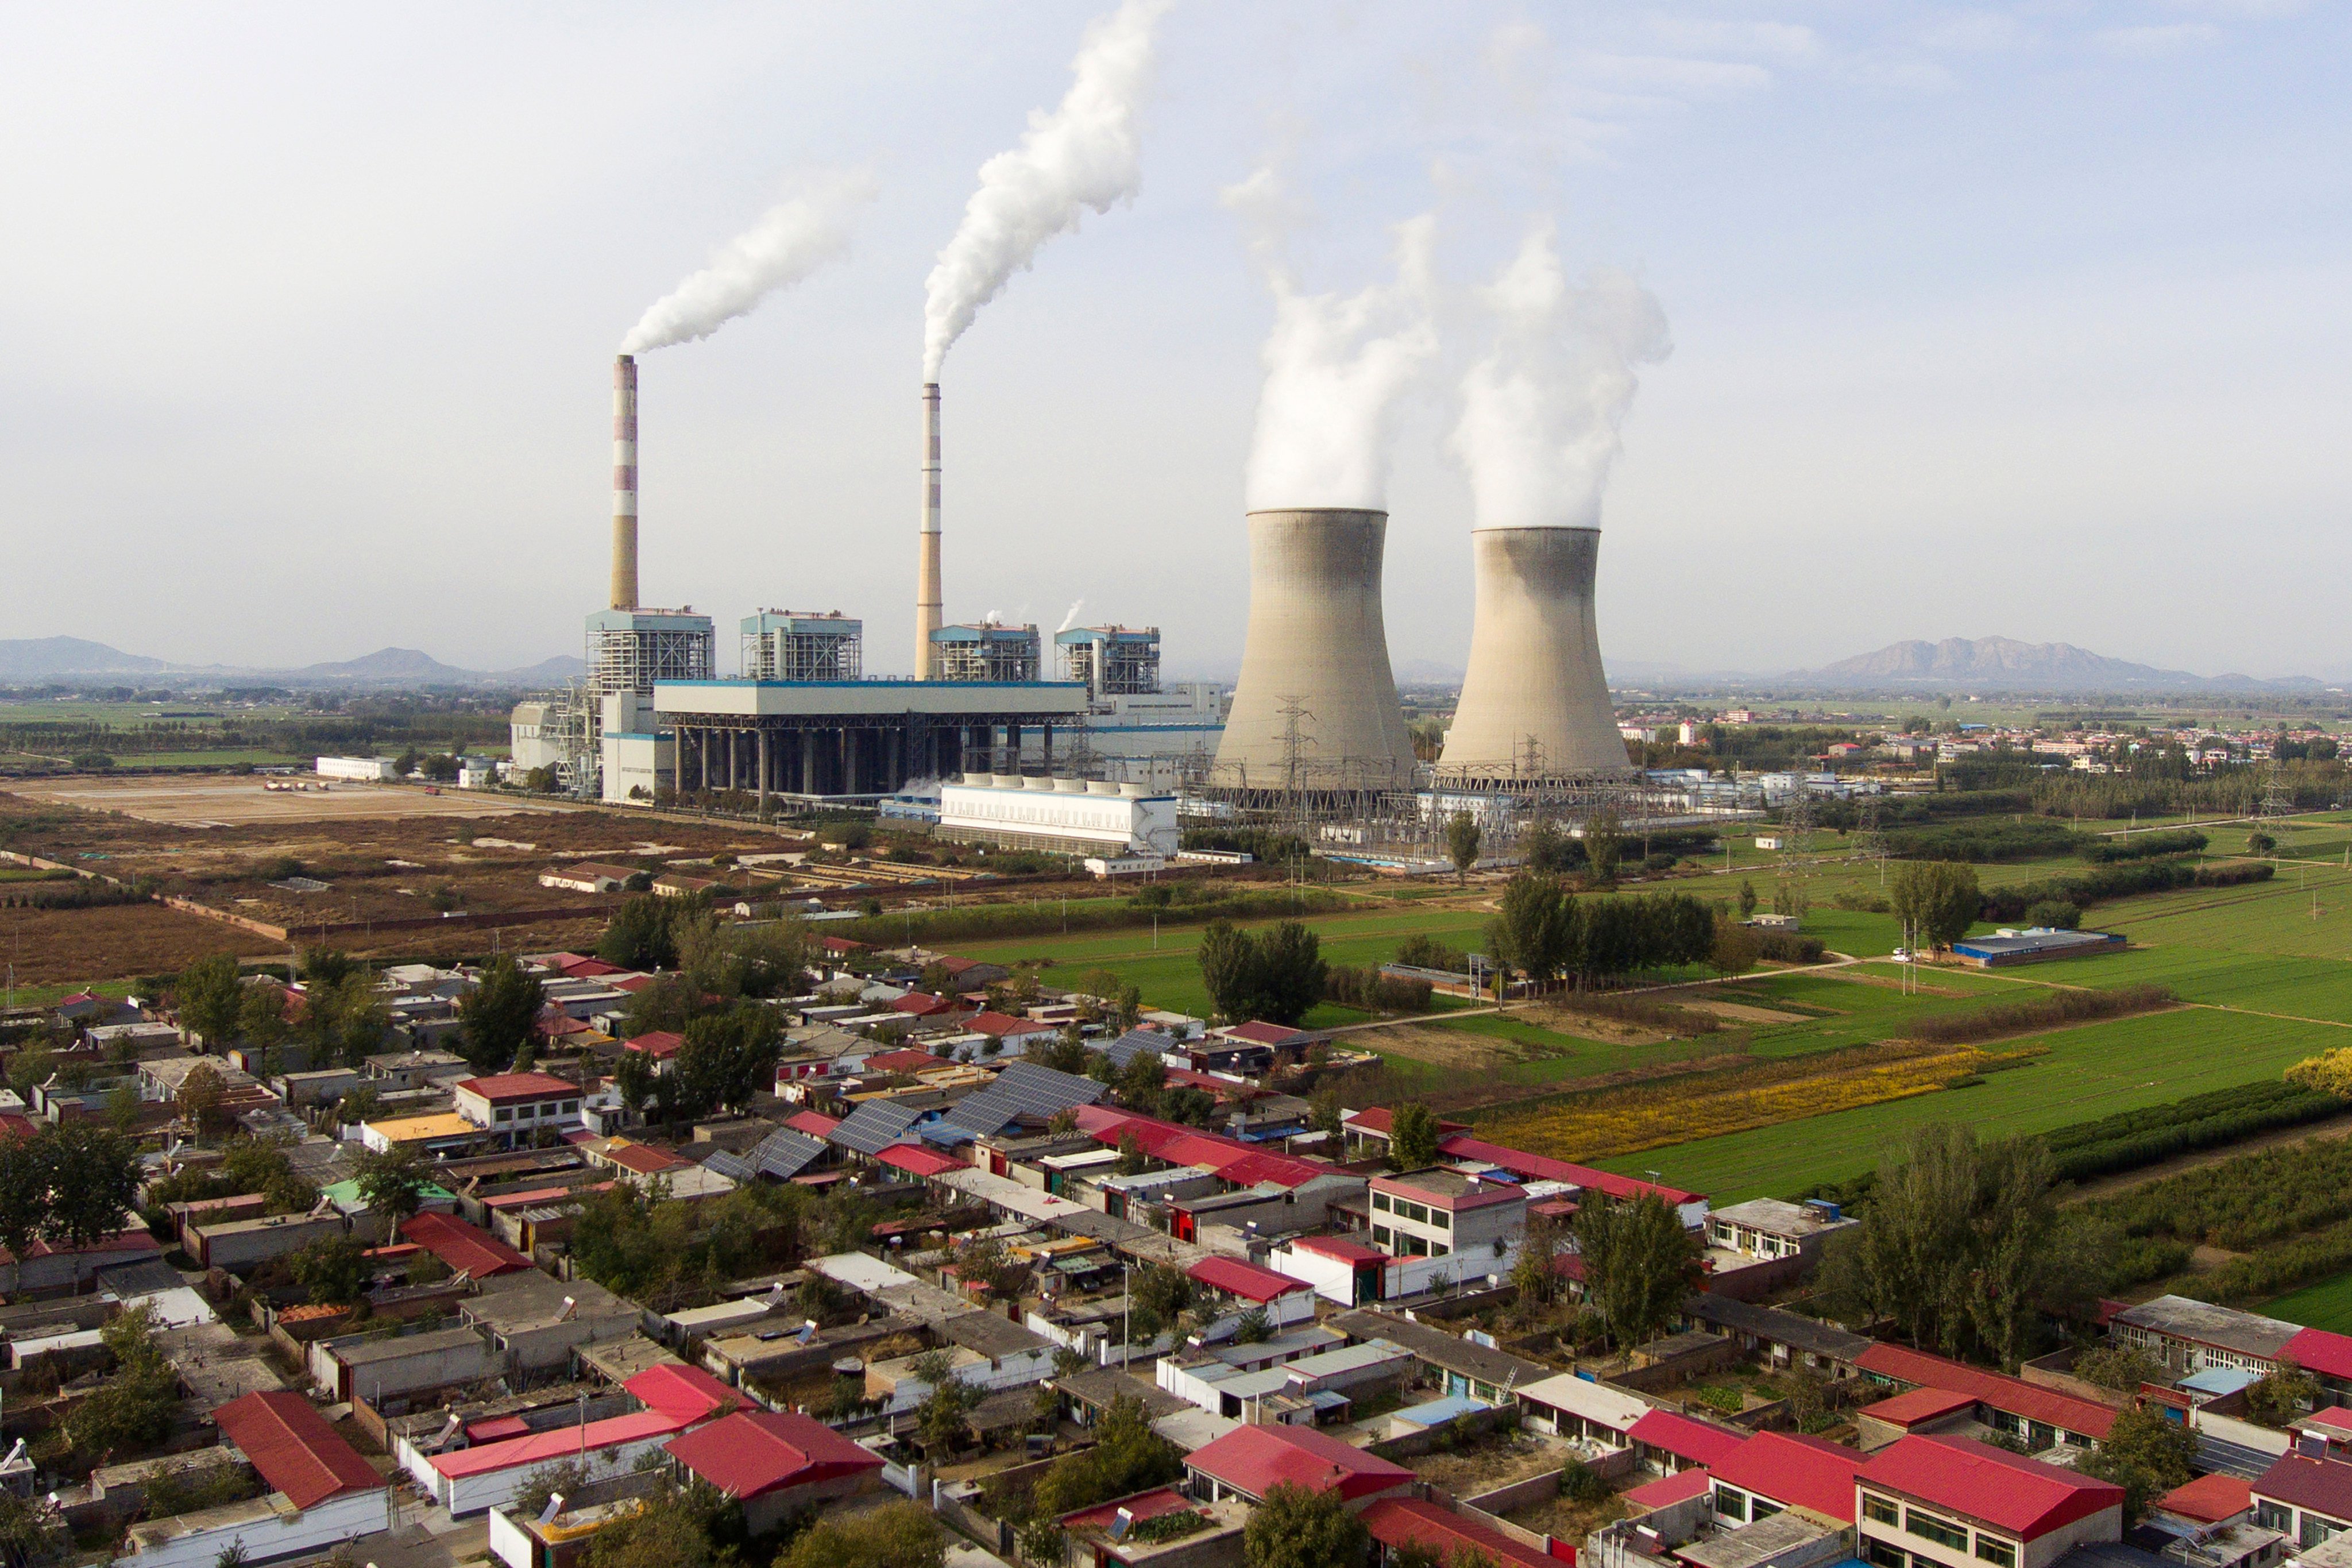 A coal-fired power plant, operates in Dingzhou, Baoding, in northern China’s Hebei province. Photo: AP